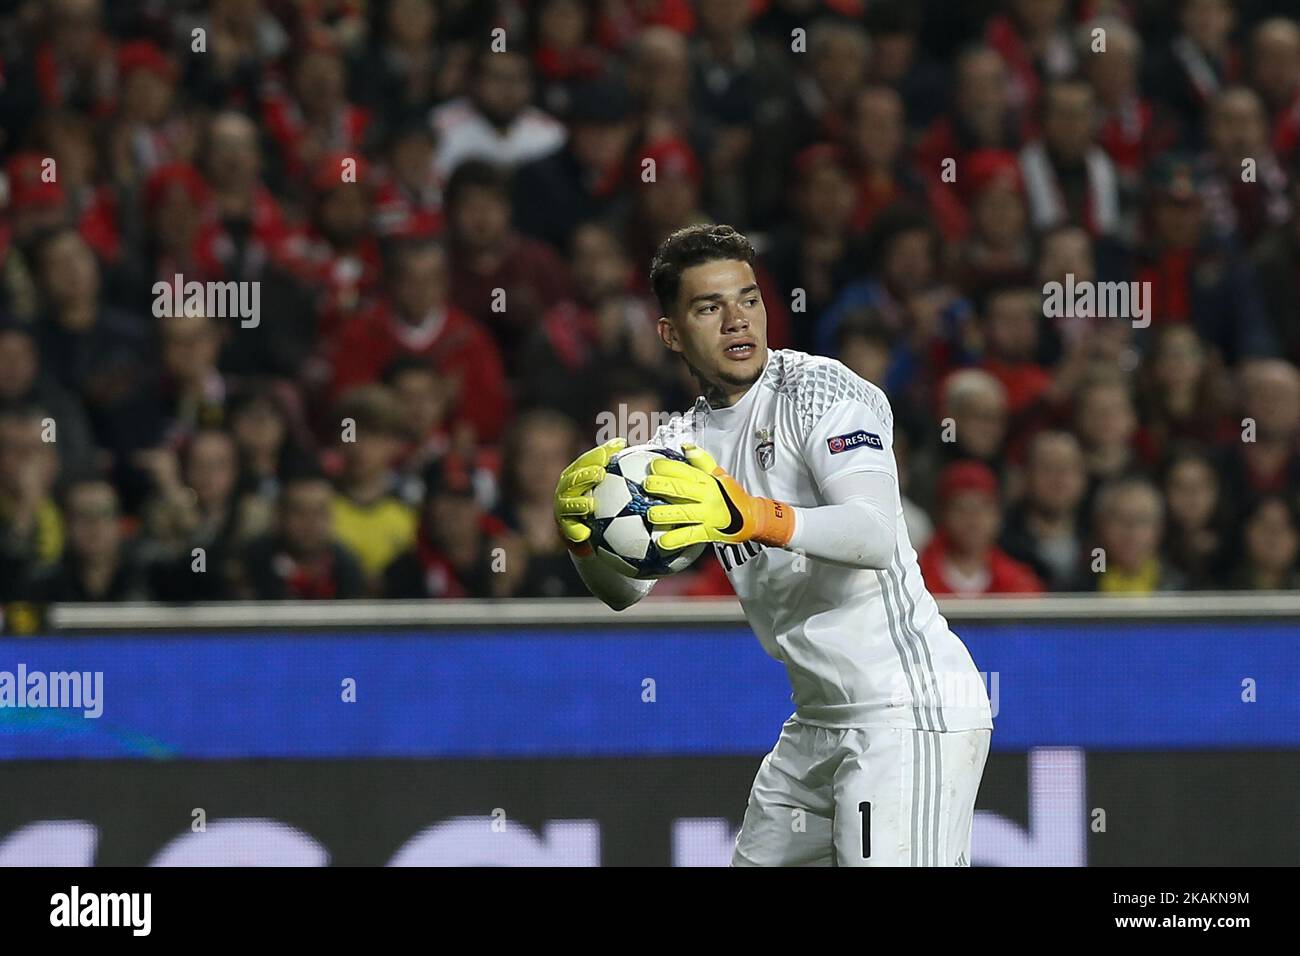 Benfica's goalkeeper Ederson in action during Champions League 2016/17 match between SL Benfica vs BVB Borussia Dortmund, in Lisbon, on February 14, 2017. (Photo by Carlos Palma/NurPhoto) *** Please Use Credit from Credit Field *** Stock Photo